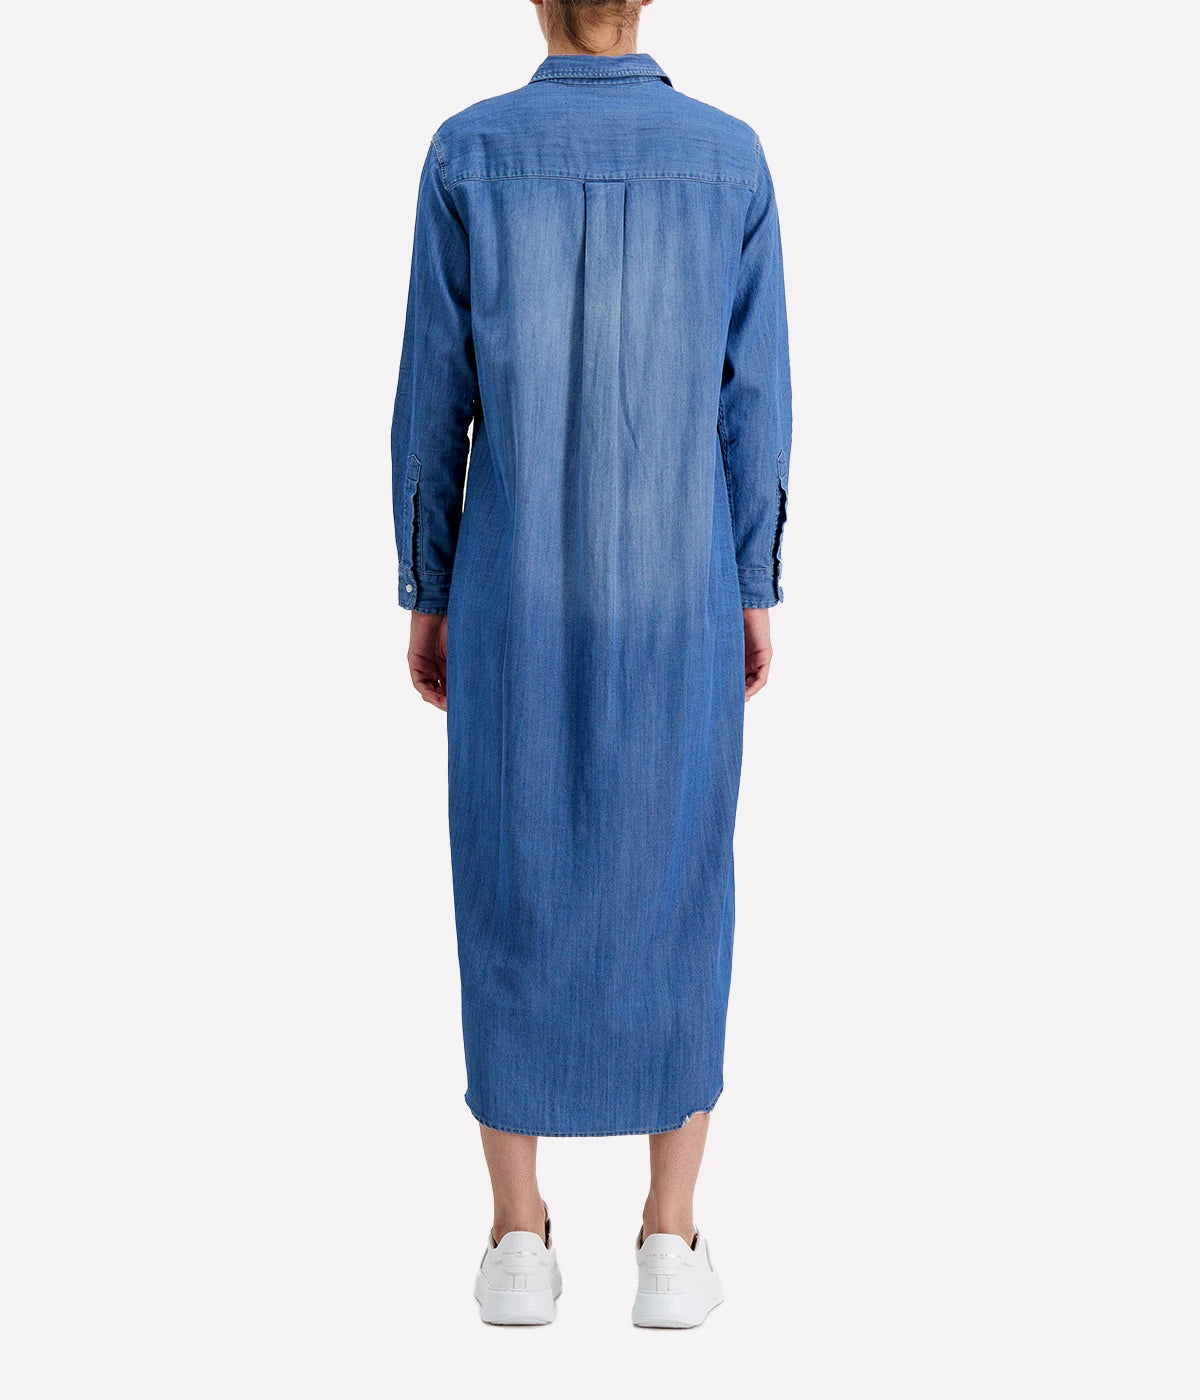 Rory Woven Denim Long Dress in Distressed Vintage Wash